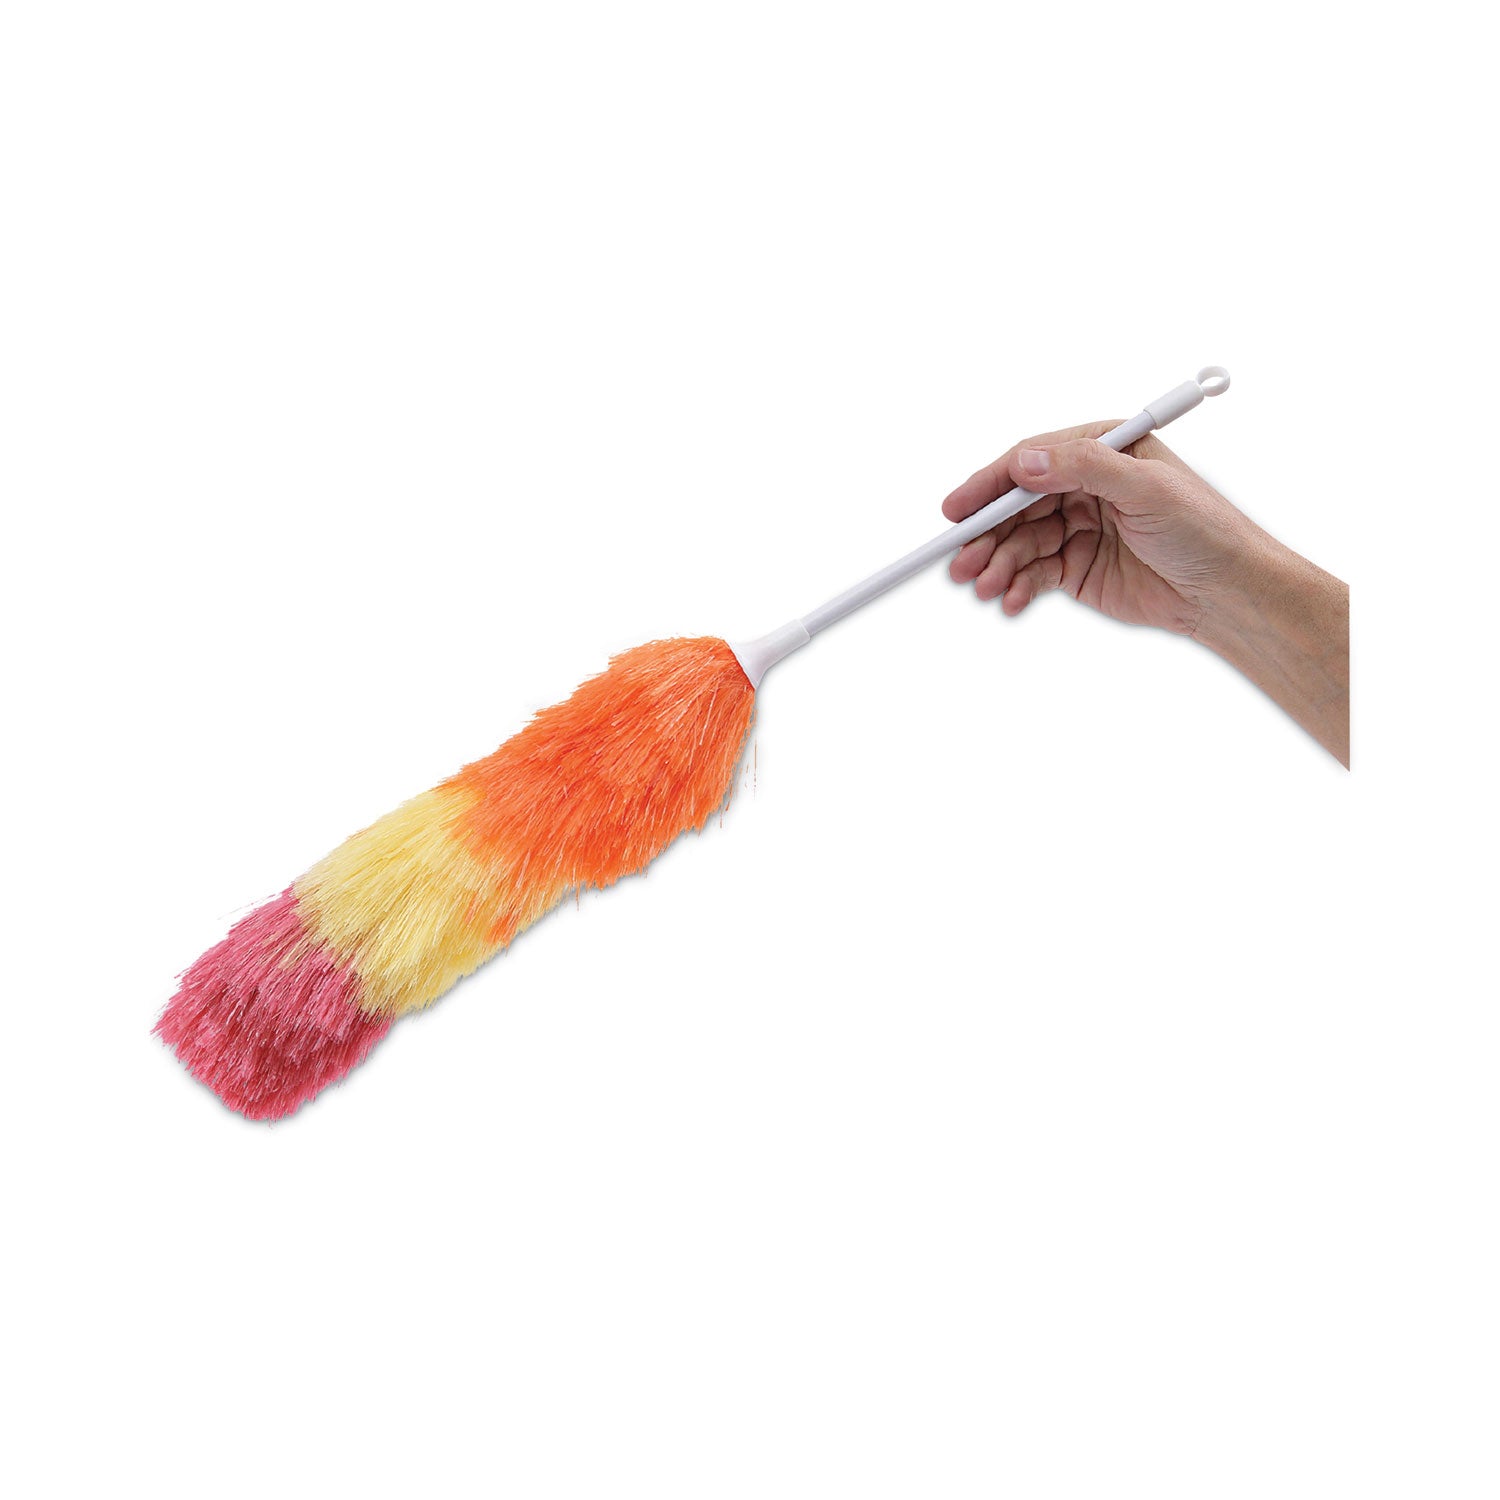 polywool-duster-w-20-plastic-handle-assorted-colors_bwk9441 - 5